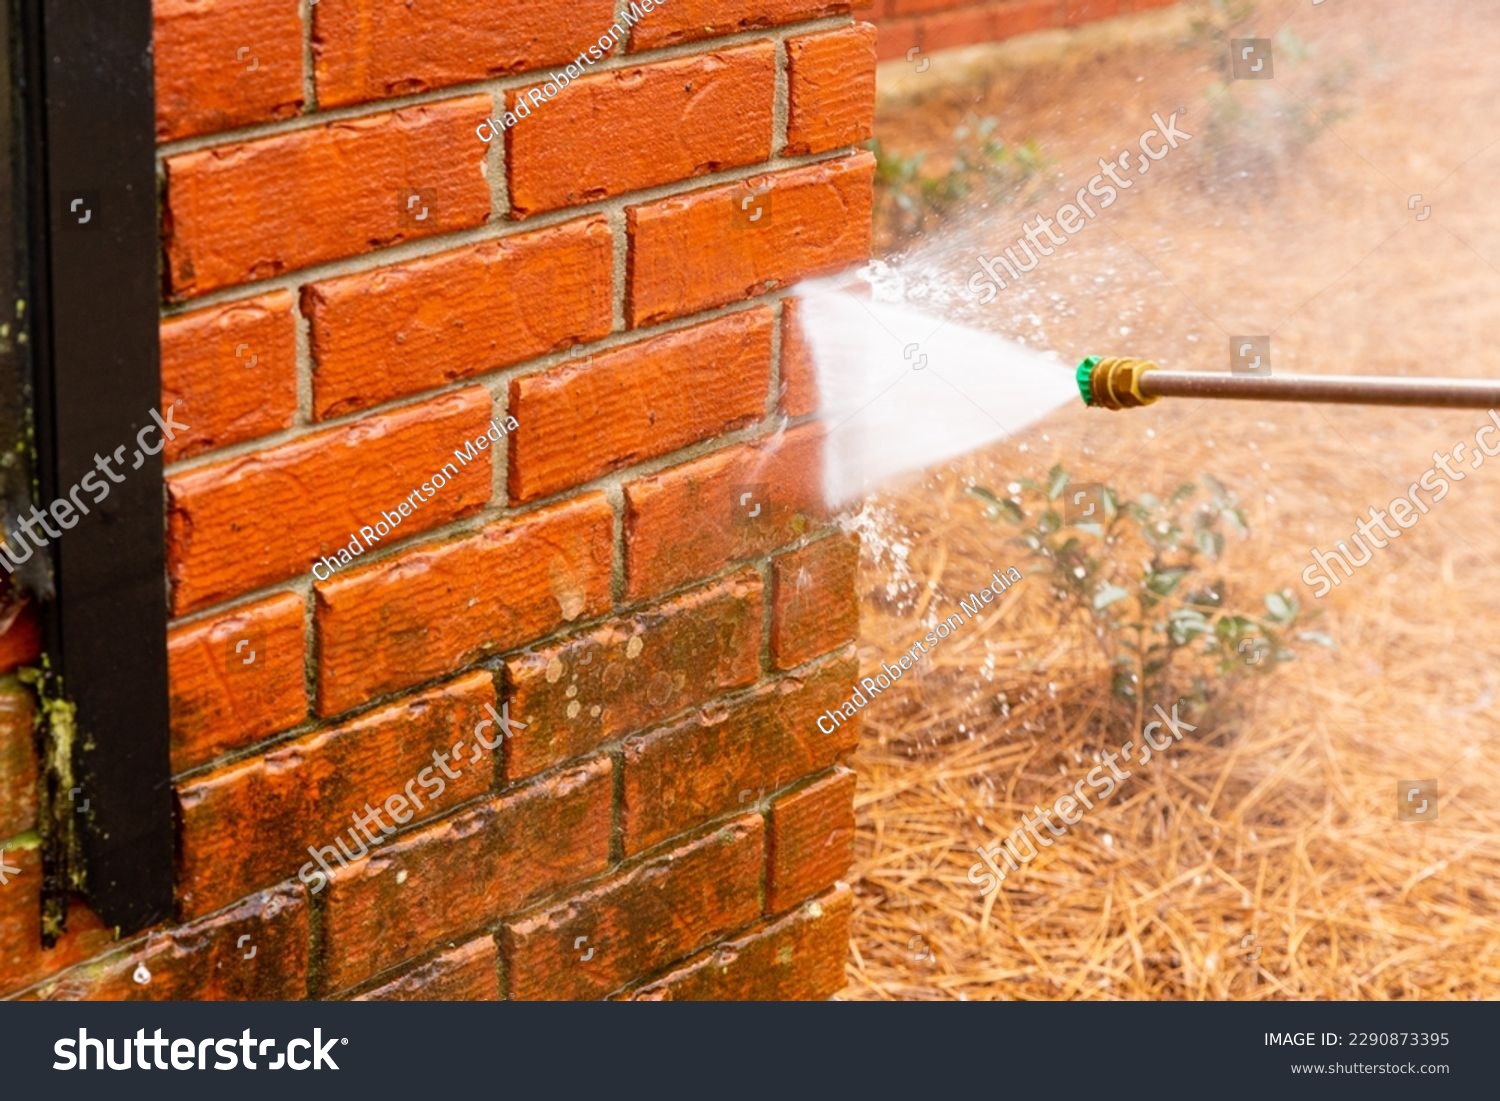 Pressure washer using water to clean a dirty brick wall on a house. #2290873395